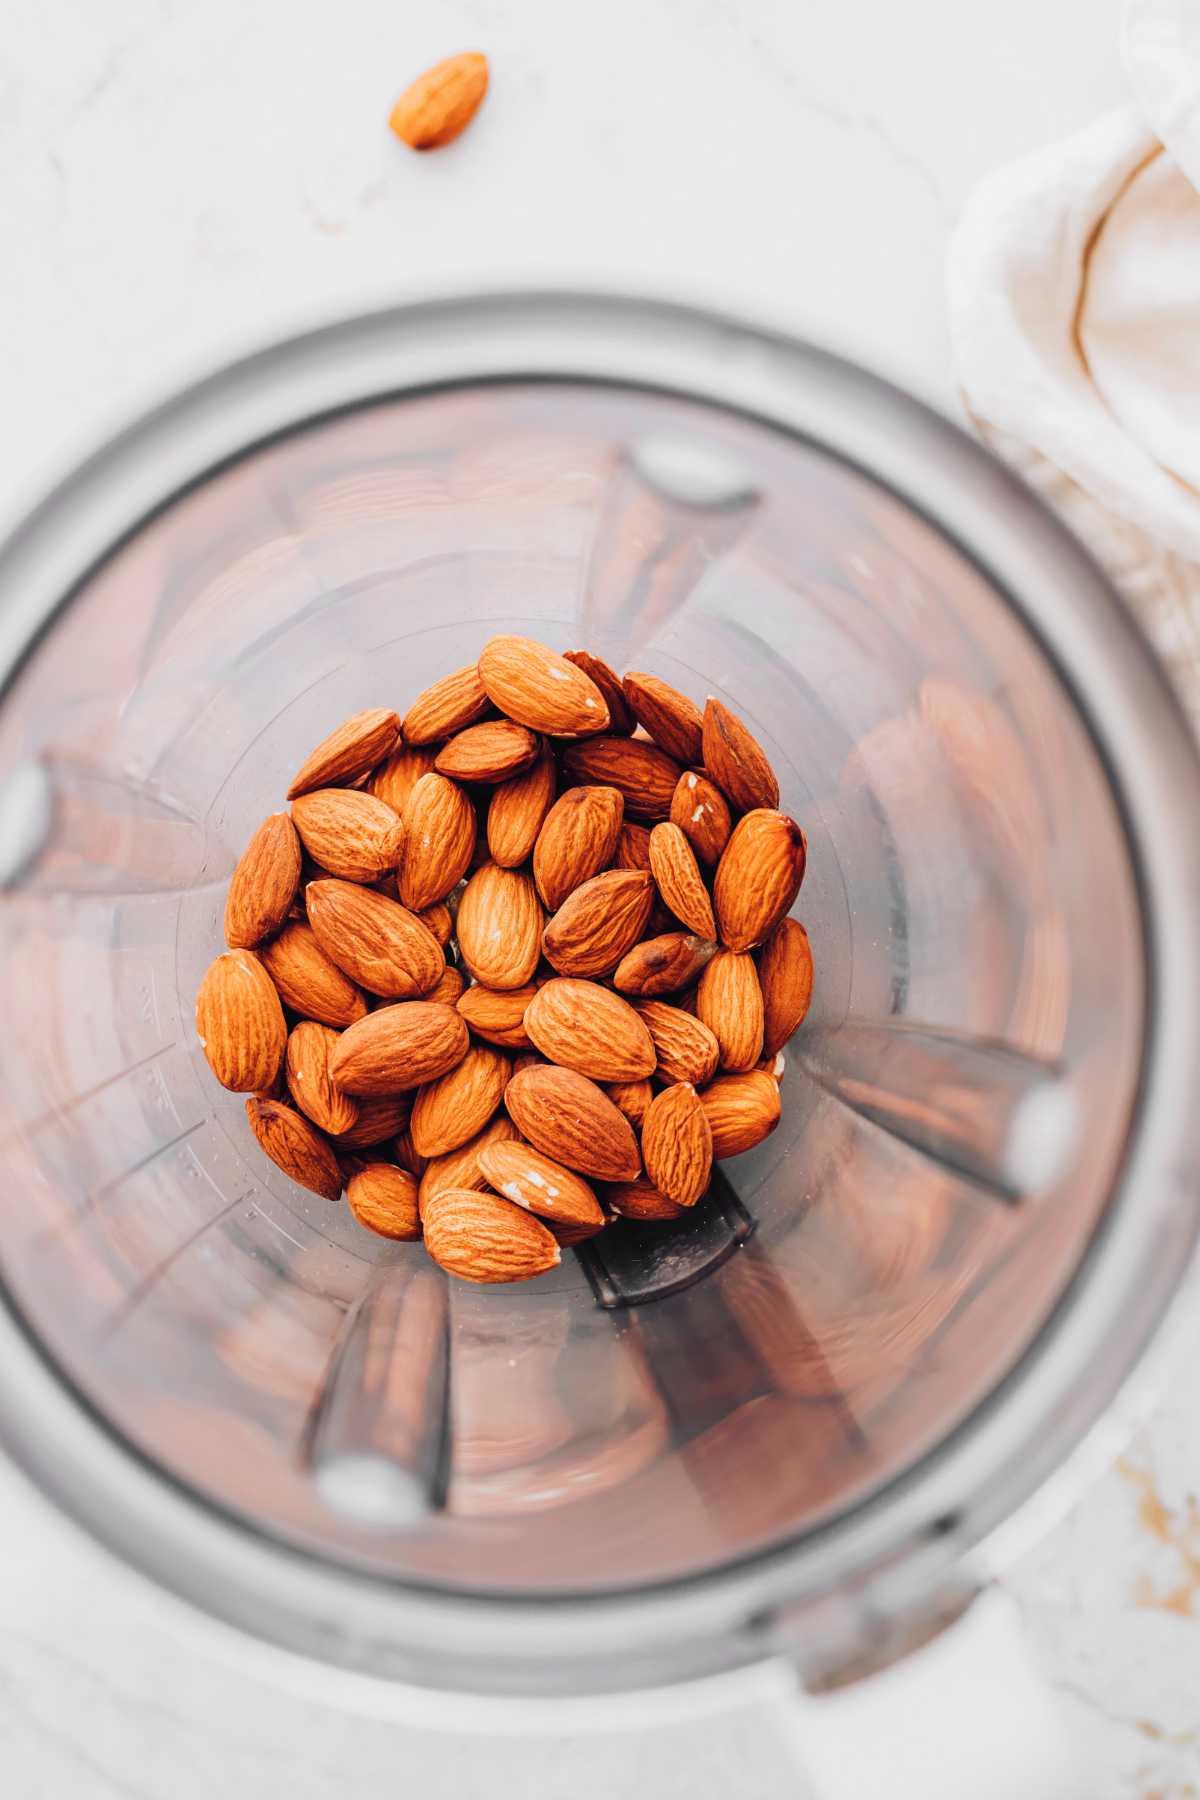 almonds with skin in a blender jar